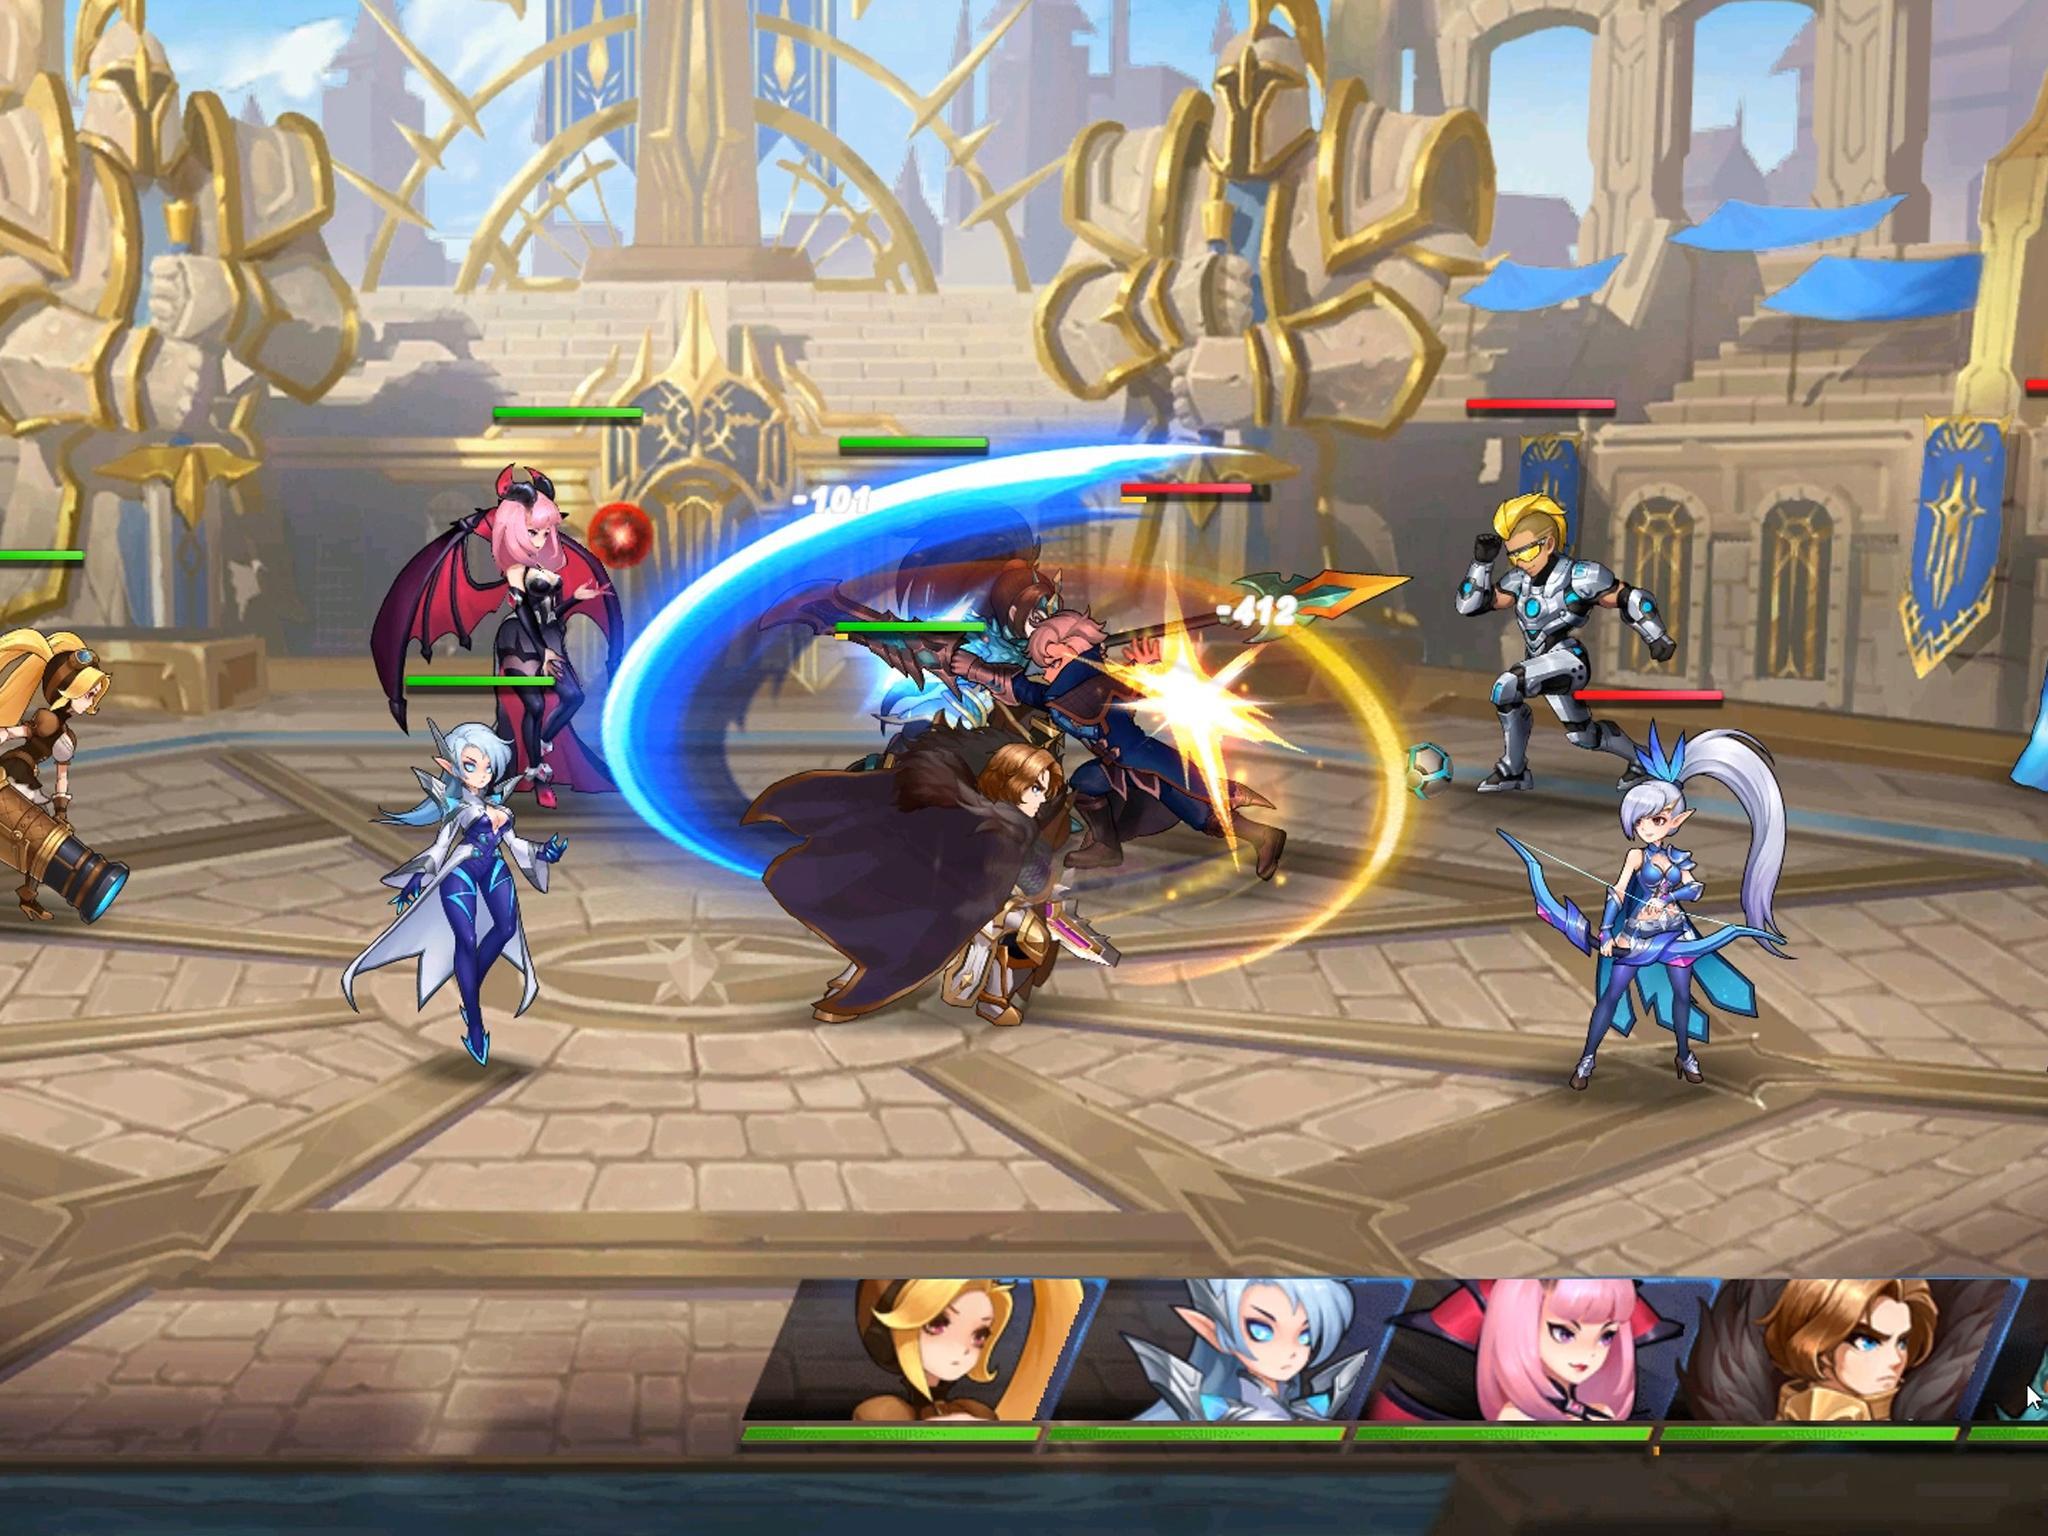 Mobile Legends: Adventure for Android - APK Download - 